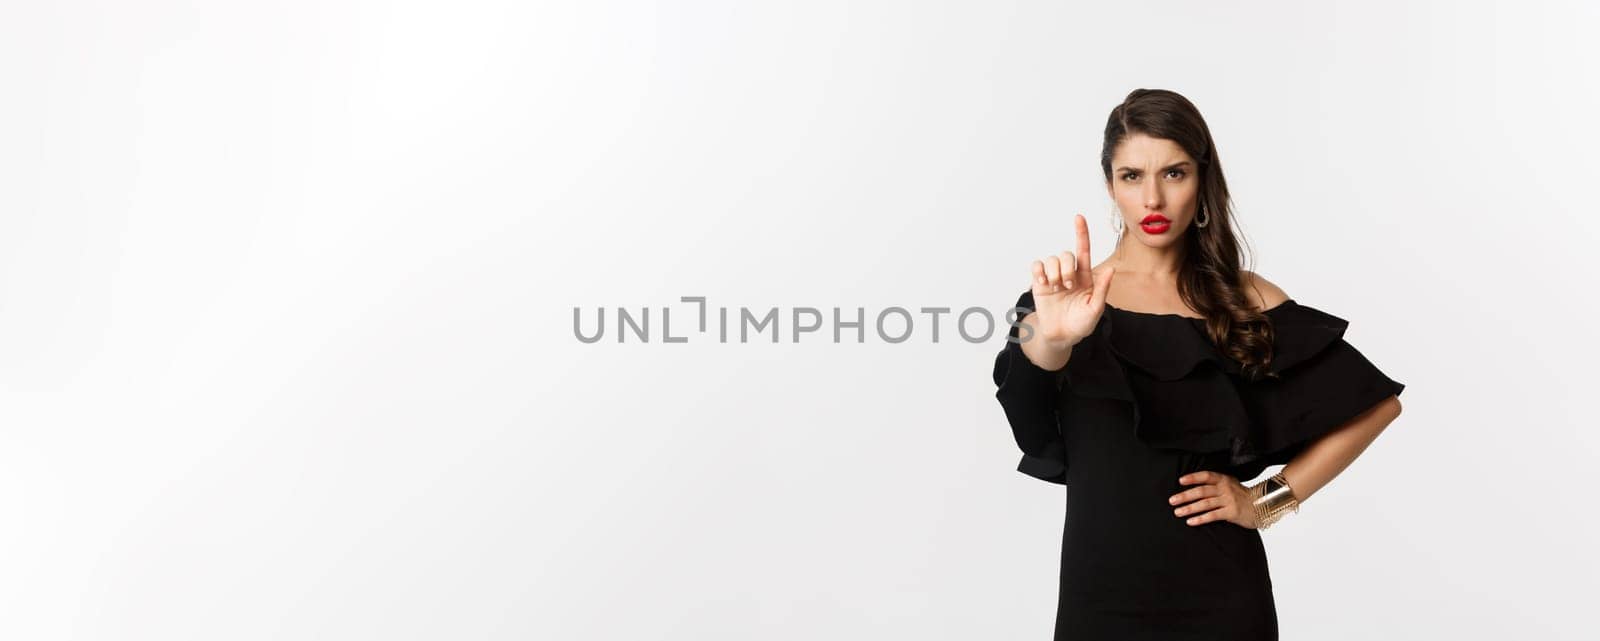 Fashion and beauty. Confident and serious lady in black dress, showing finger in stop gesture, prohibit and disapprove something, standing over white background.